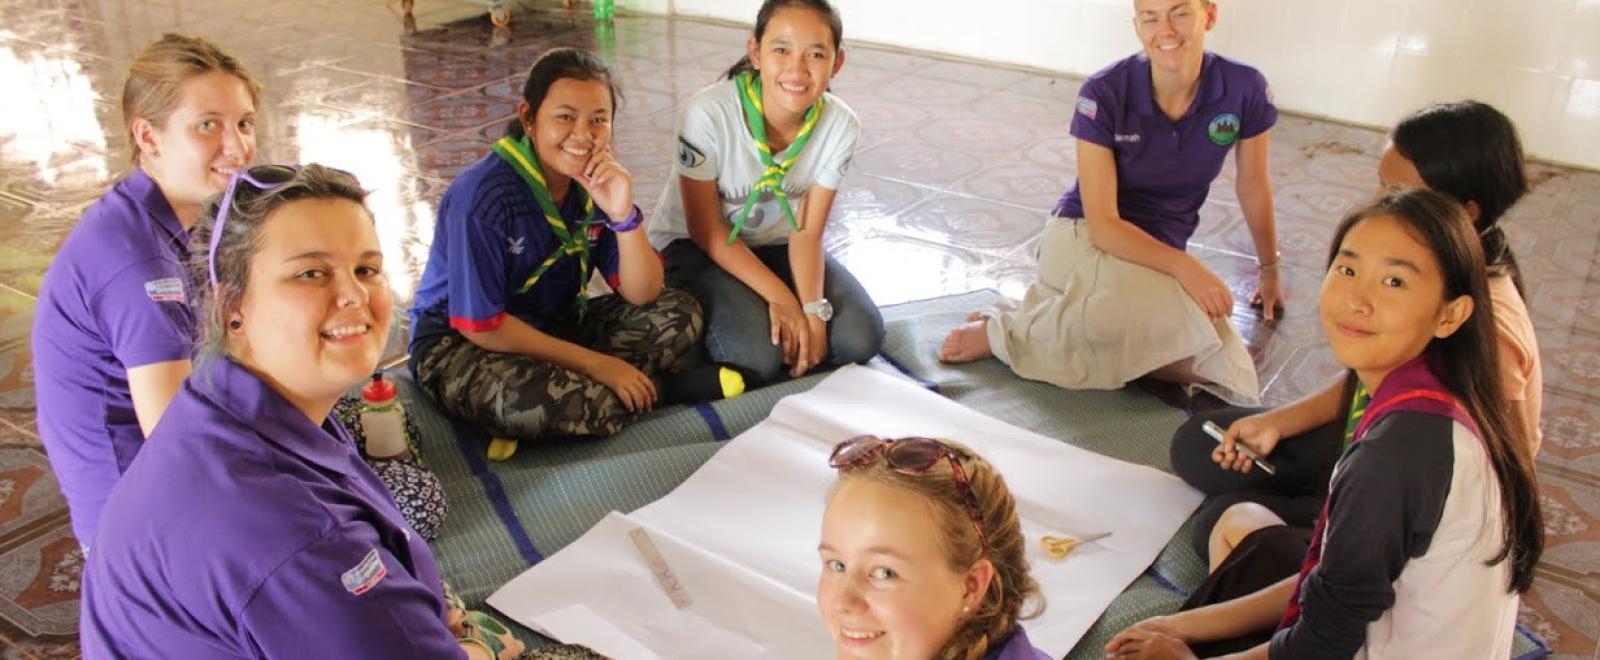 A group of Girl Guides from the UK on a volunteer trip to Mongolia meet a local group.